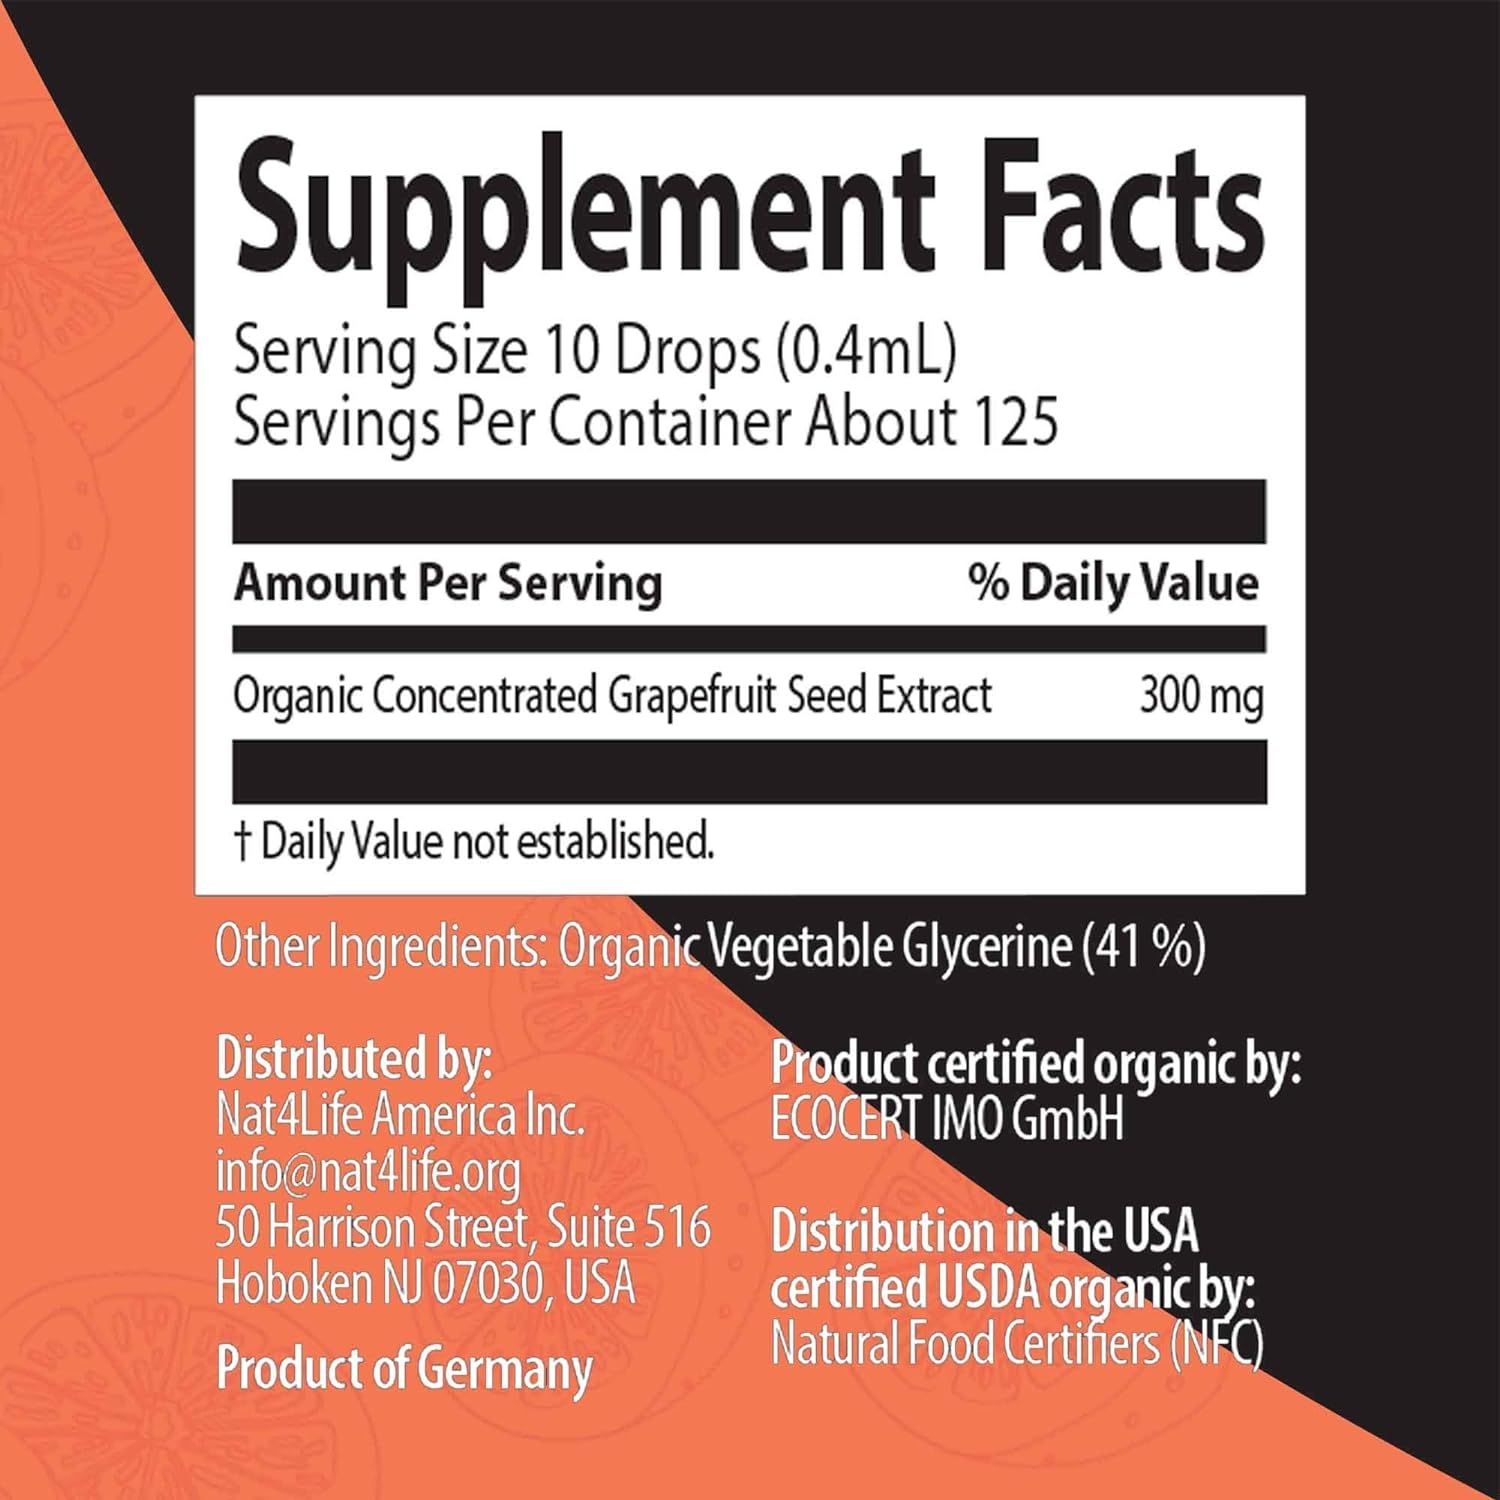 Naturity Organic Grapefruit Seed Extract Supplement - 300mg Grapefruit Seed Extract/Serving, 41 Servings per Bottle - Pure GSE Liquid Concentrate, 1.7 fl oz (50ml)